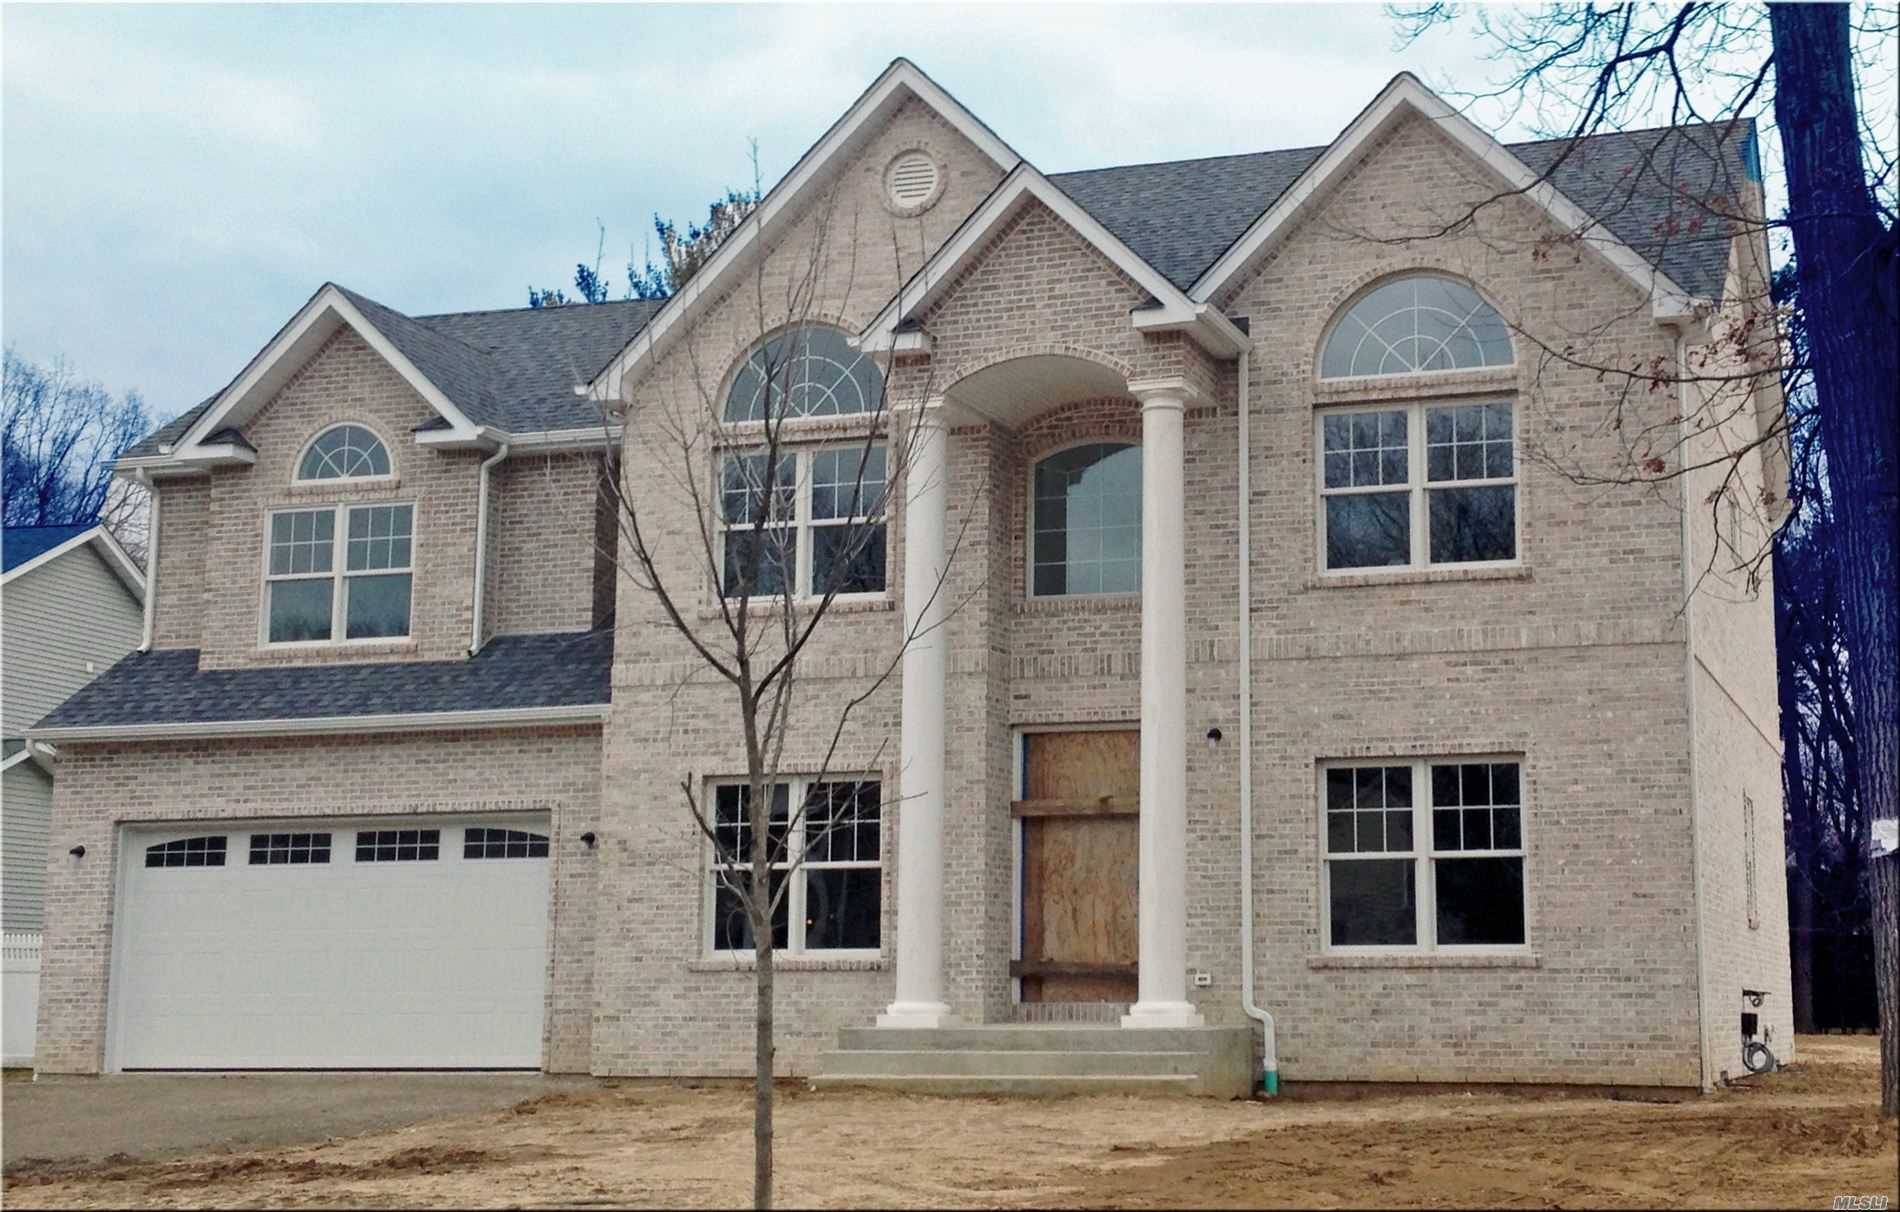 TO BE BUILT Photos shown convey craftsmanship of prior home built Builder will adjust pricing accordingly Inviting Front Porch Welcomes You Into This Magnificent Home With Gracious Architectural Details.